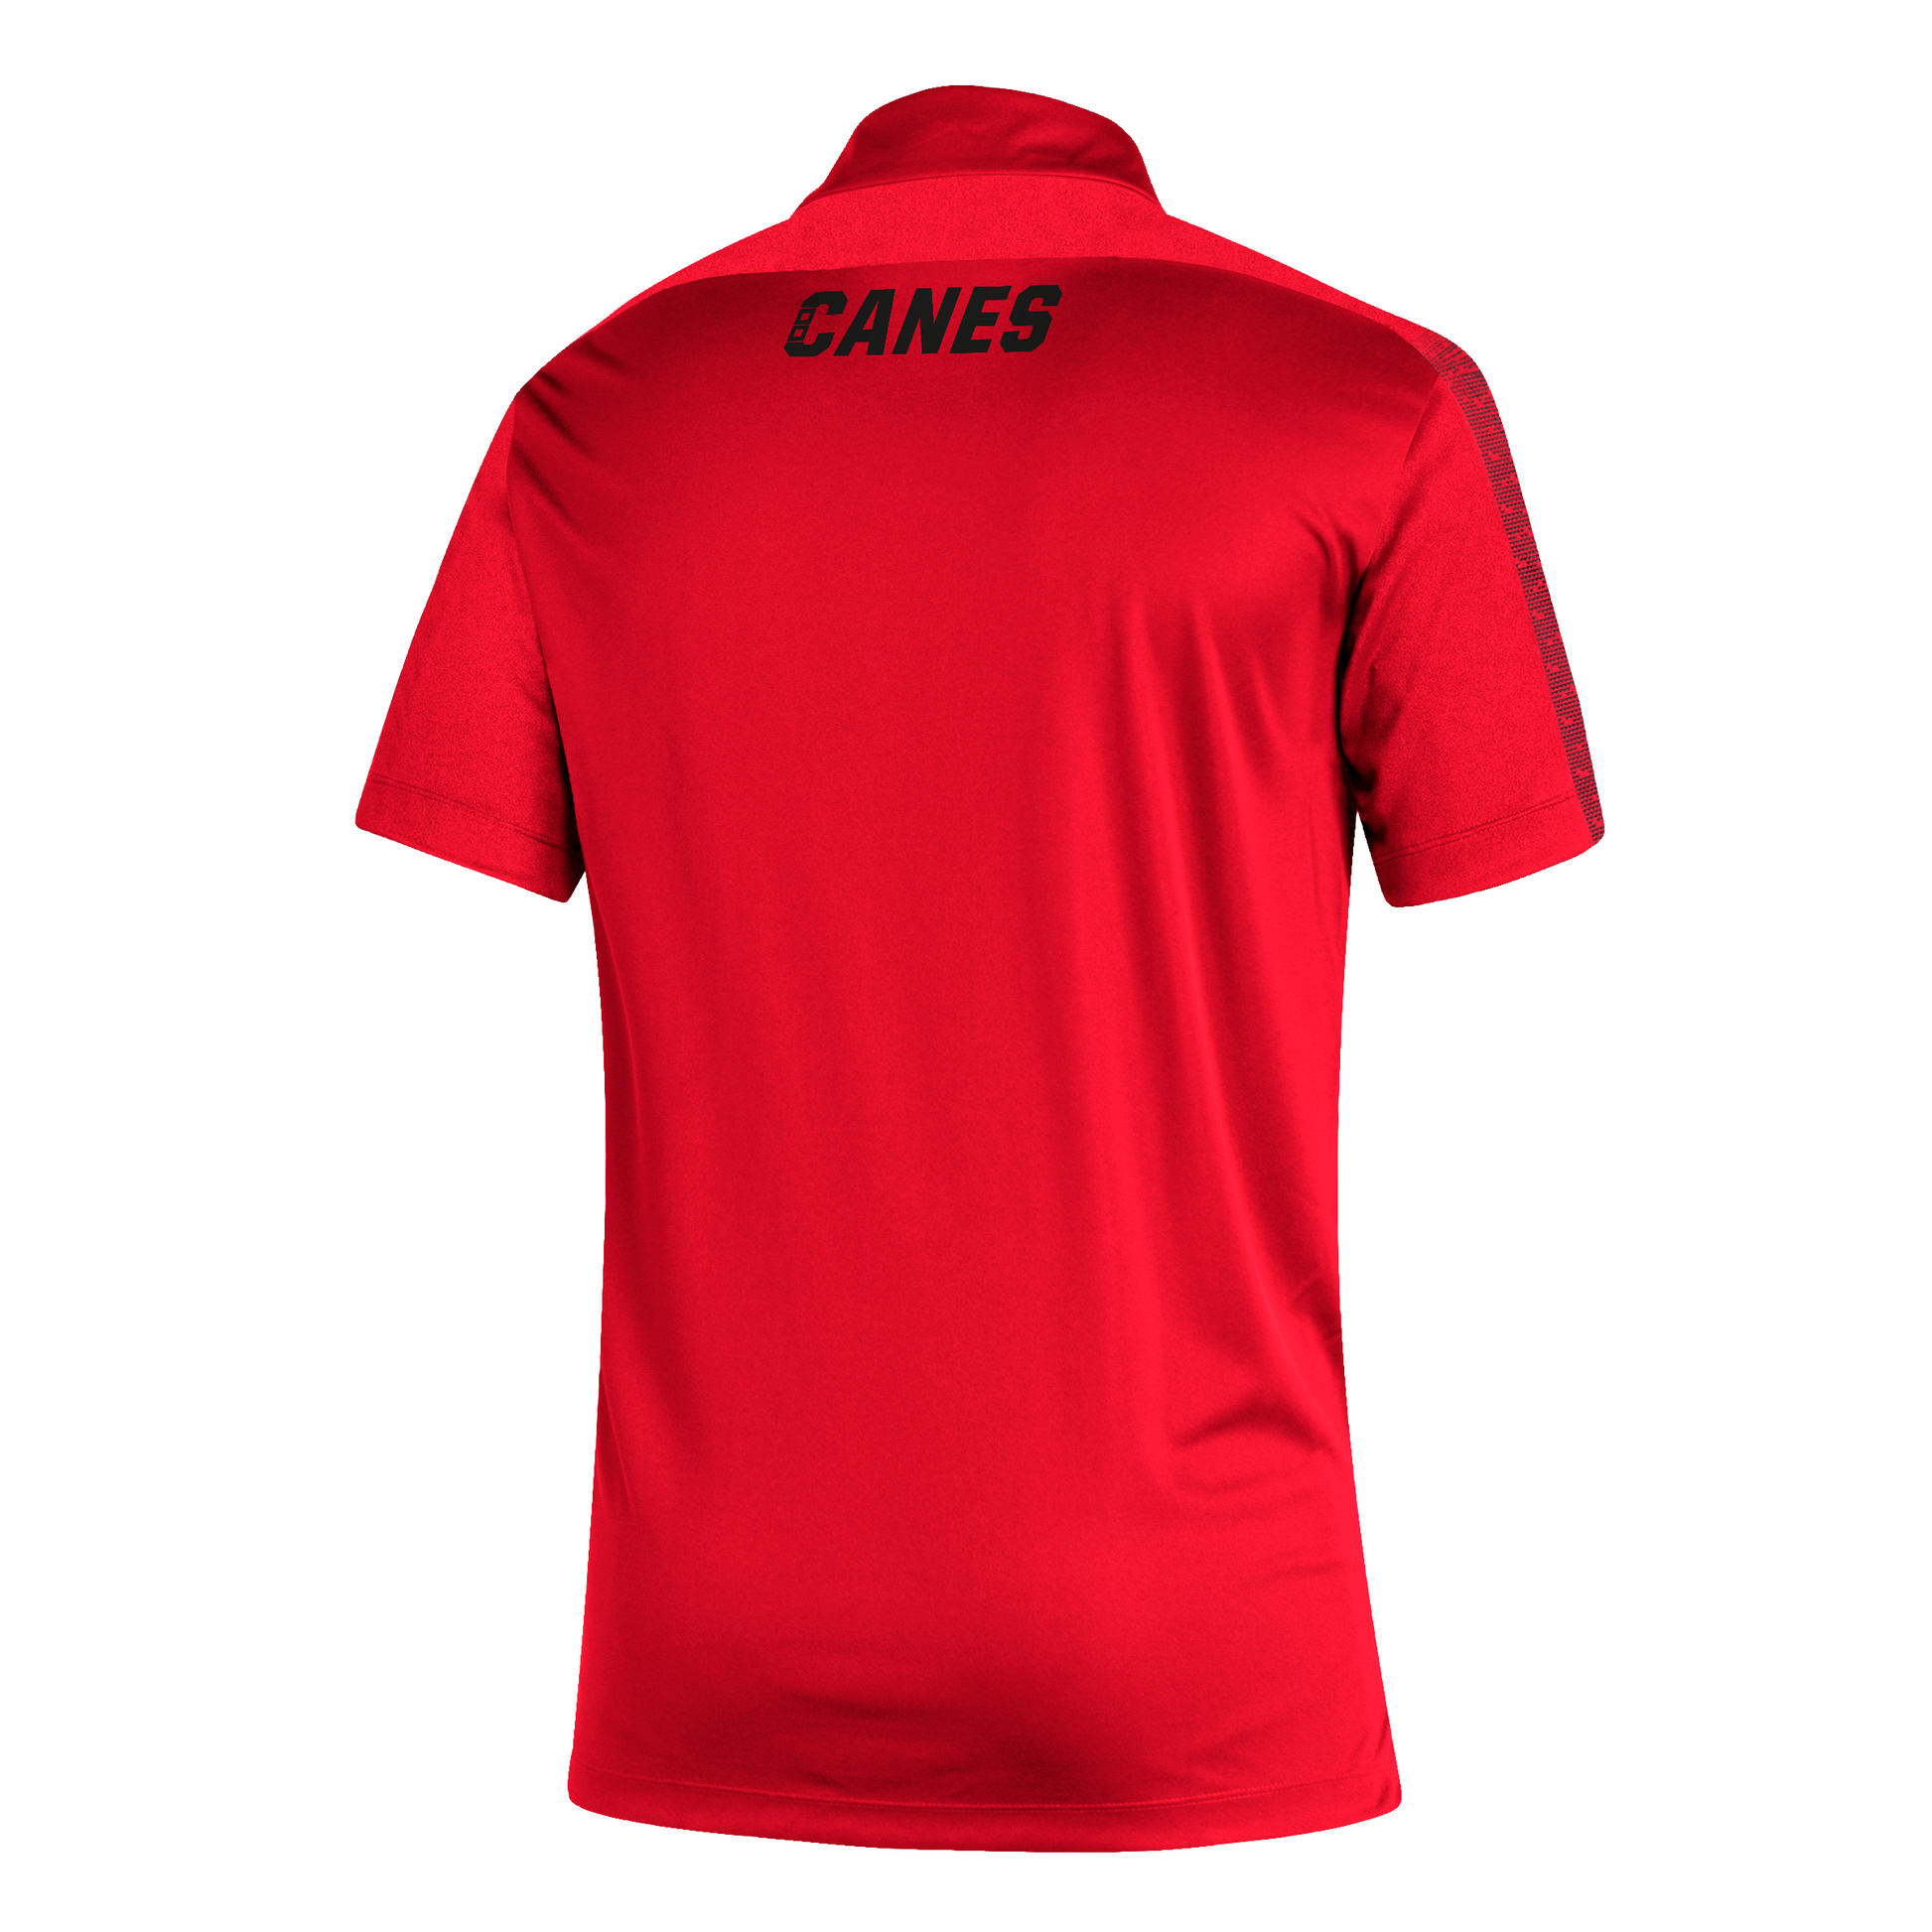 Back View: Red polo with CANES wordmark in black at neckline.